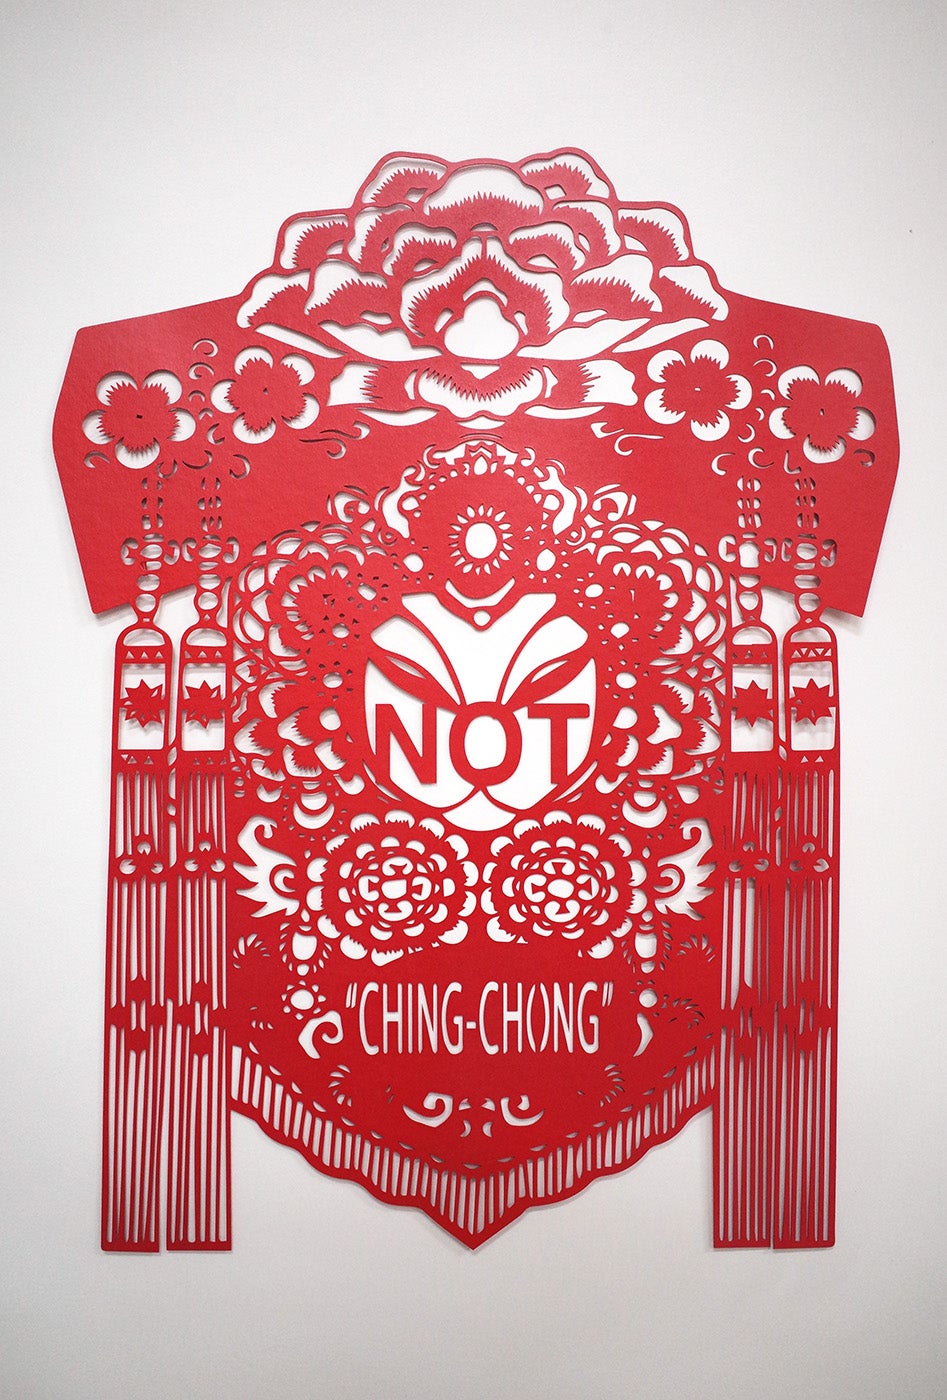 Red paper cutting that reads "NOT CHING-CHONG"